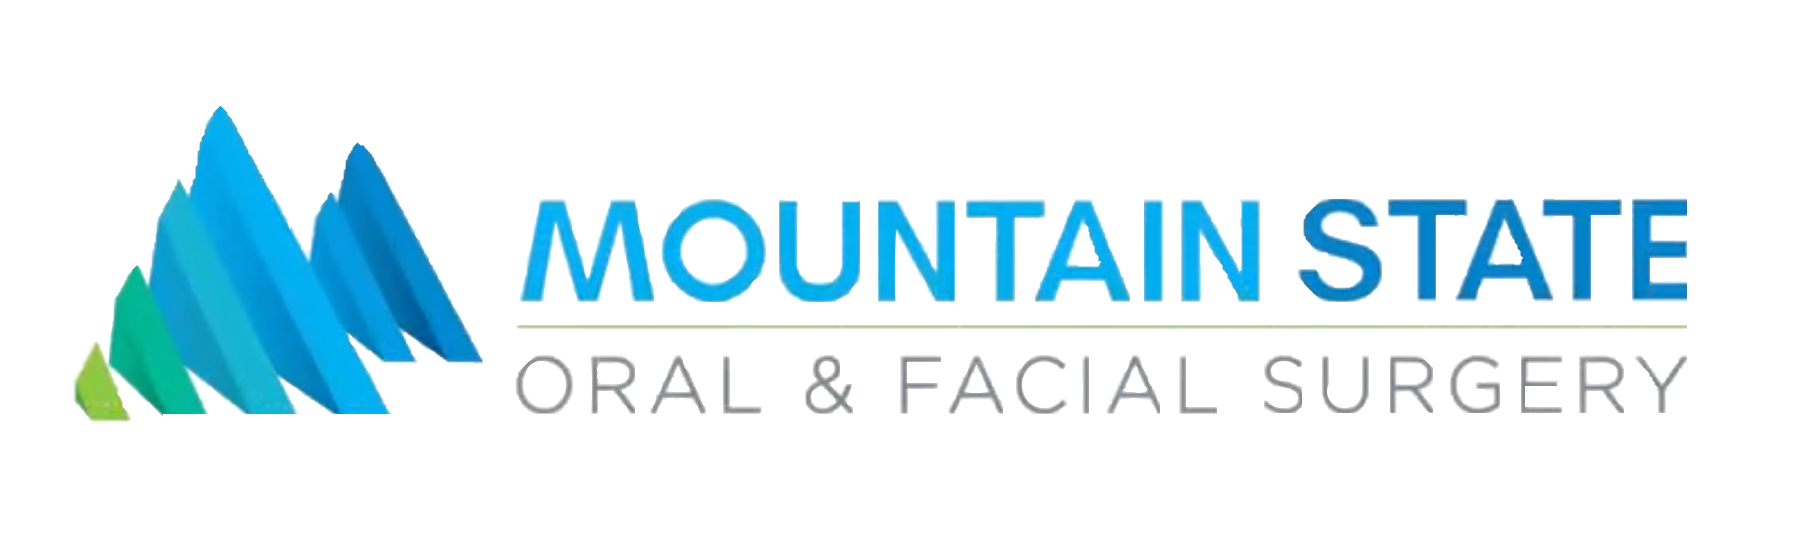 MT State Oral & Facial Surgery